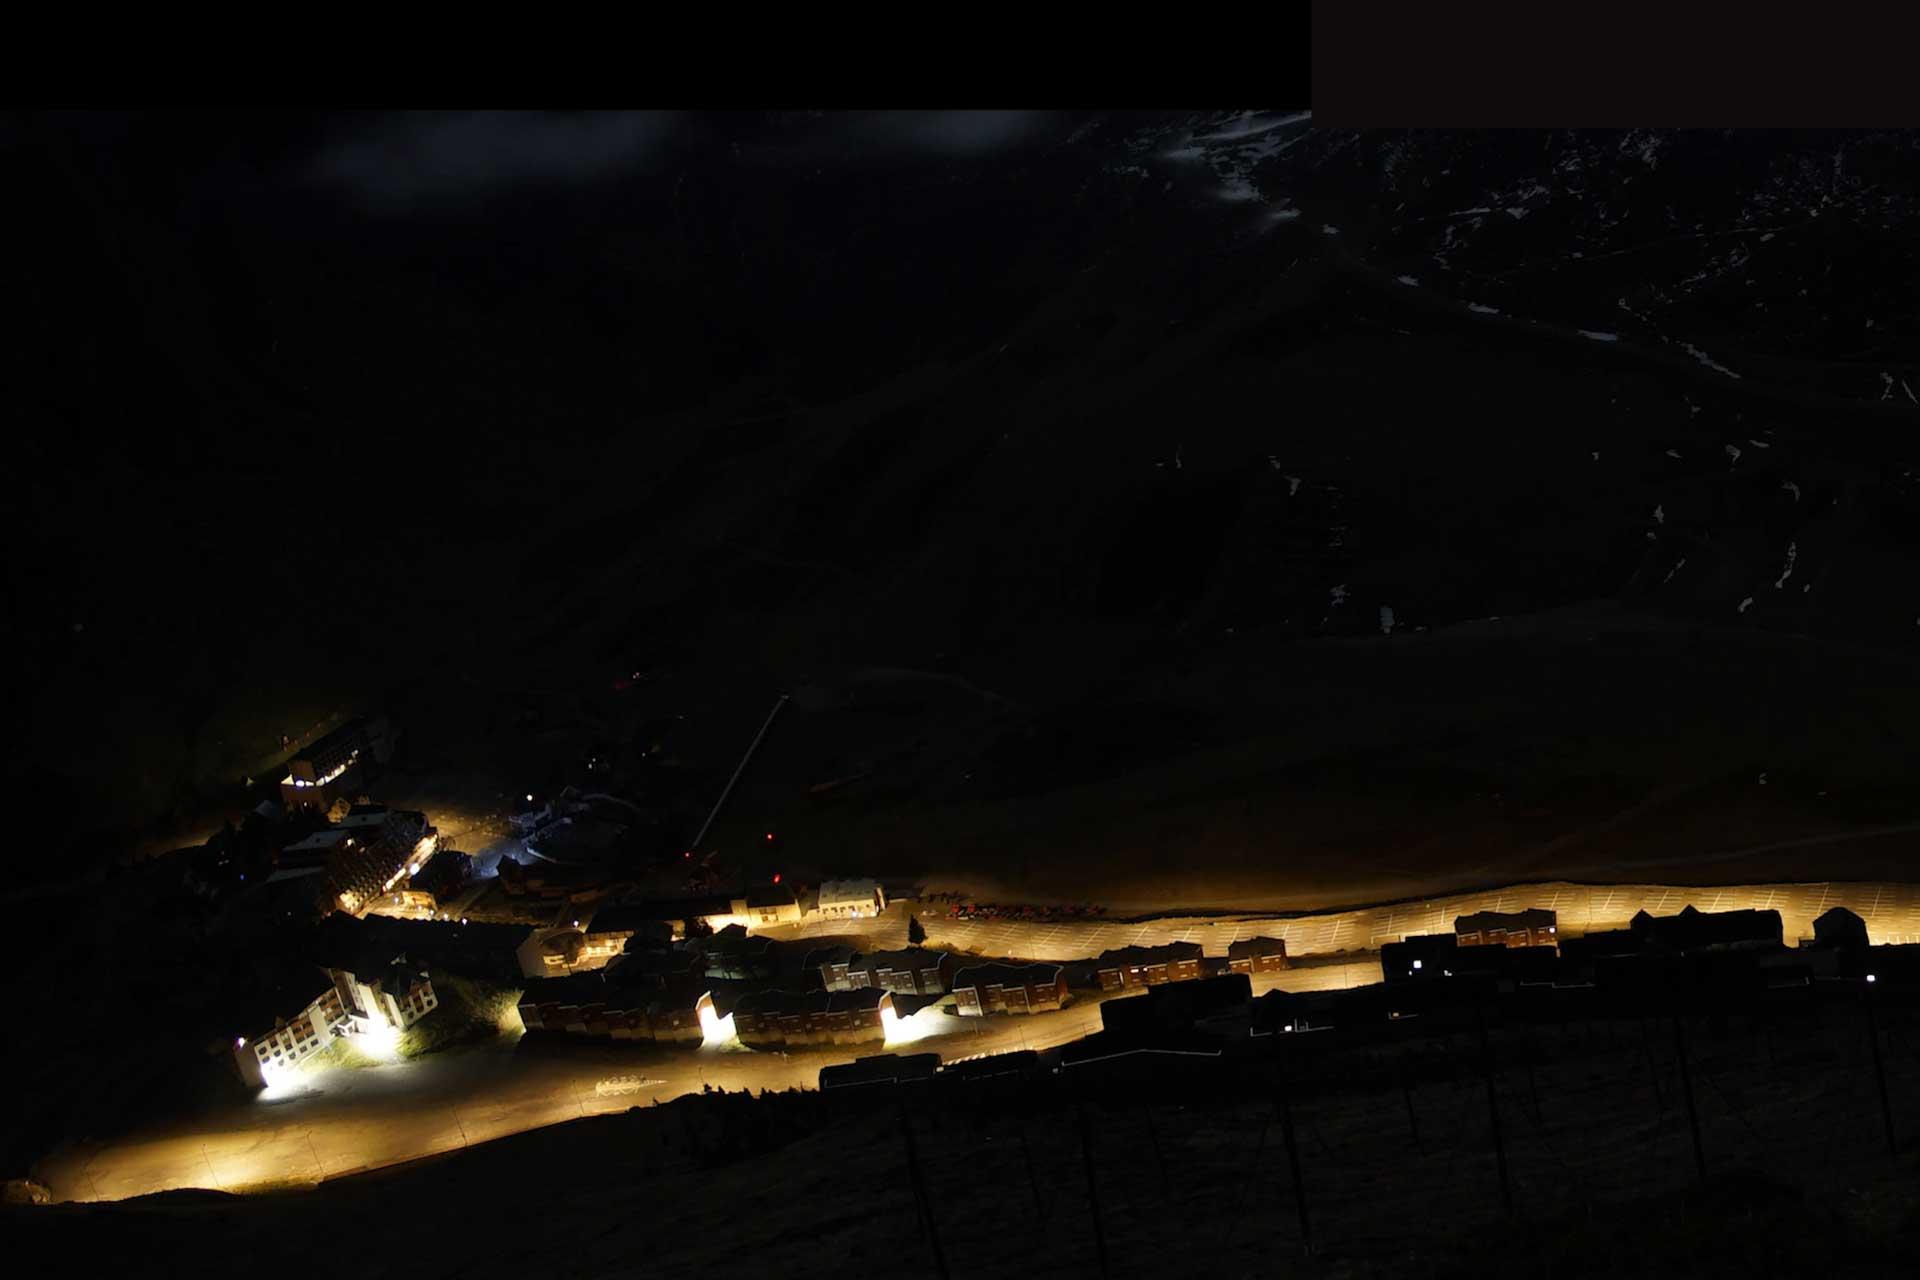 Smart lighting solution enables the town of La Mongie to dim the light so astronomers can appreciate the fully beauty of the sky above Pic du Midi in France